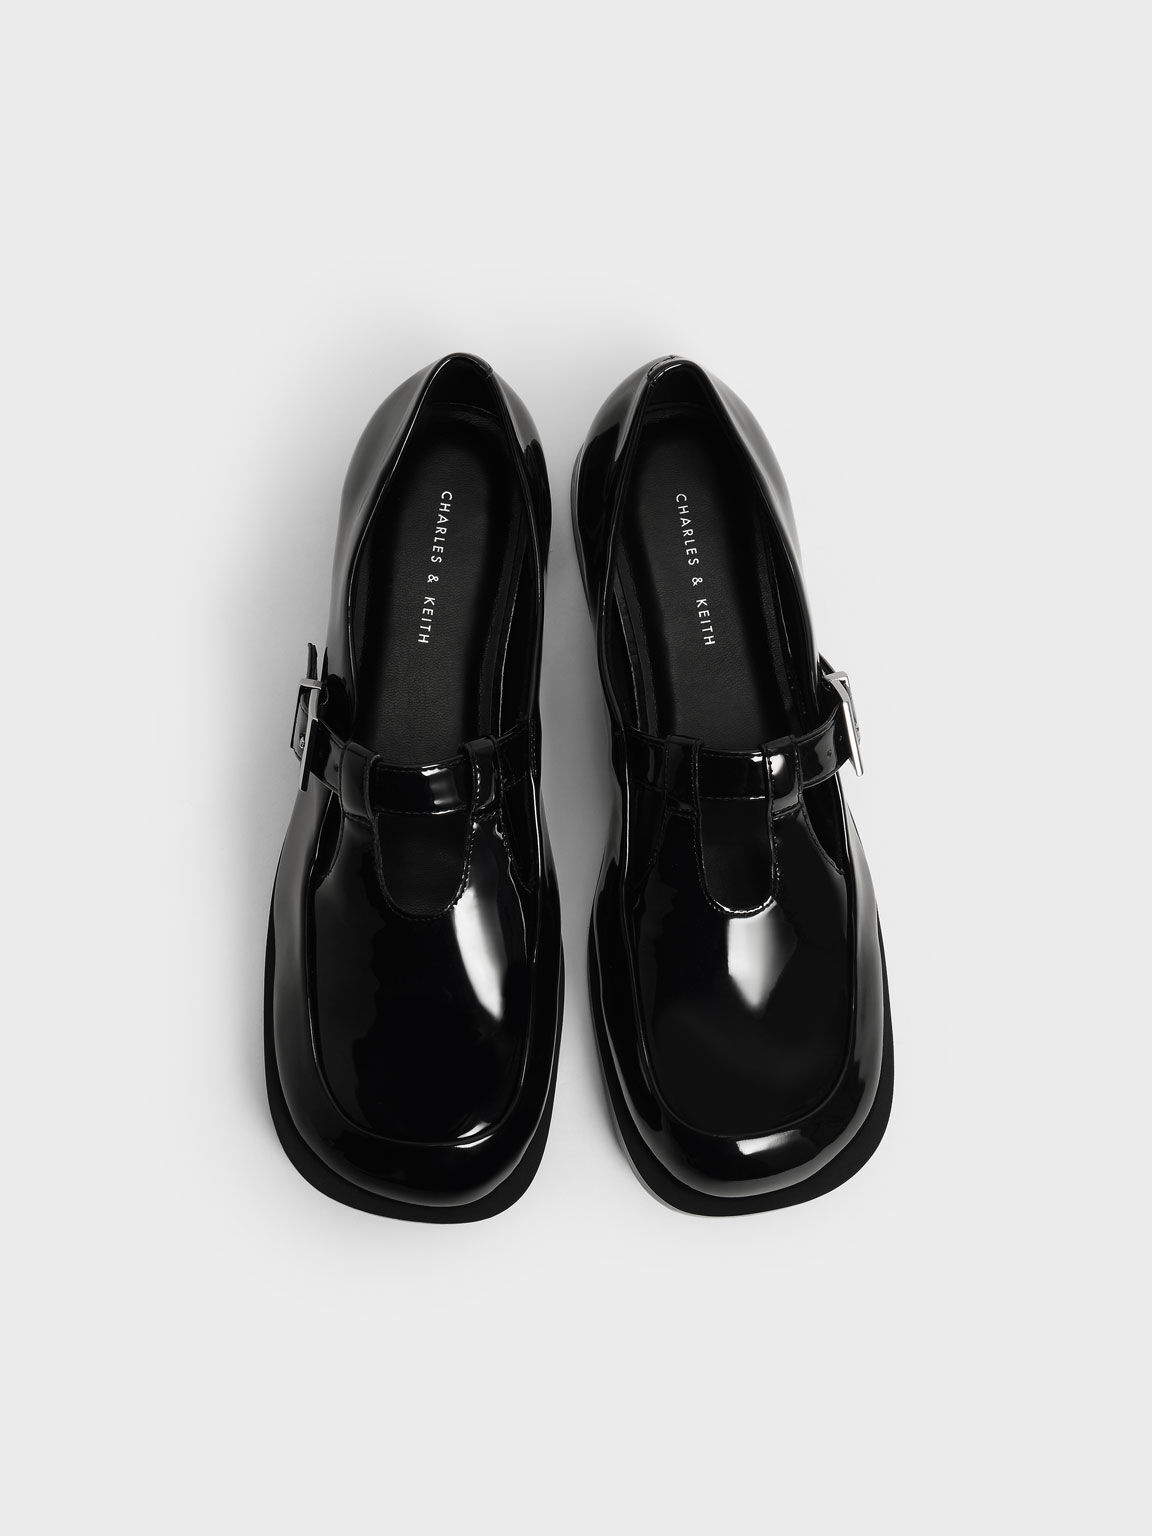 Patent Mary Jane Buckle Loafers, Black, hi-res